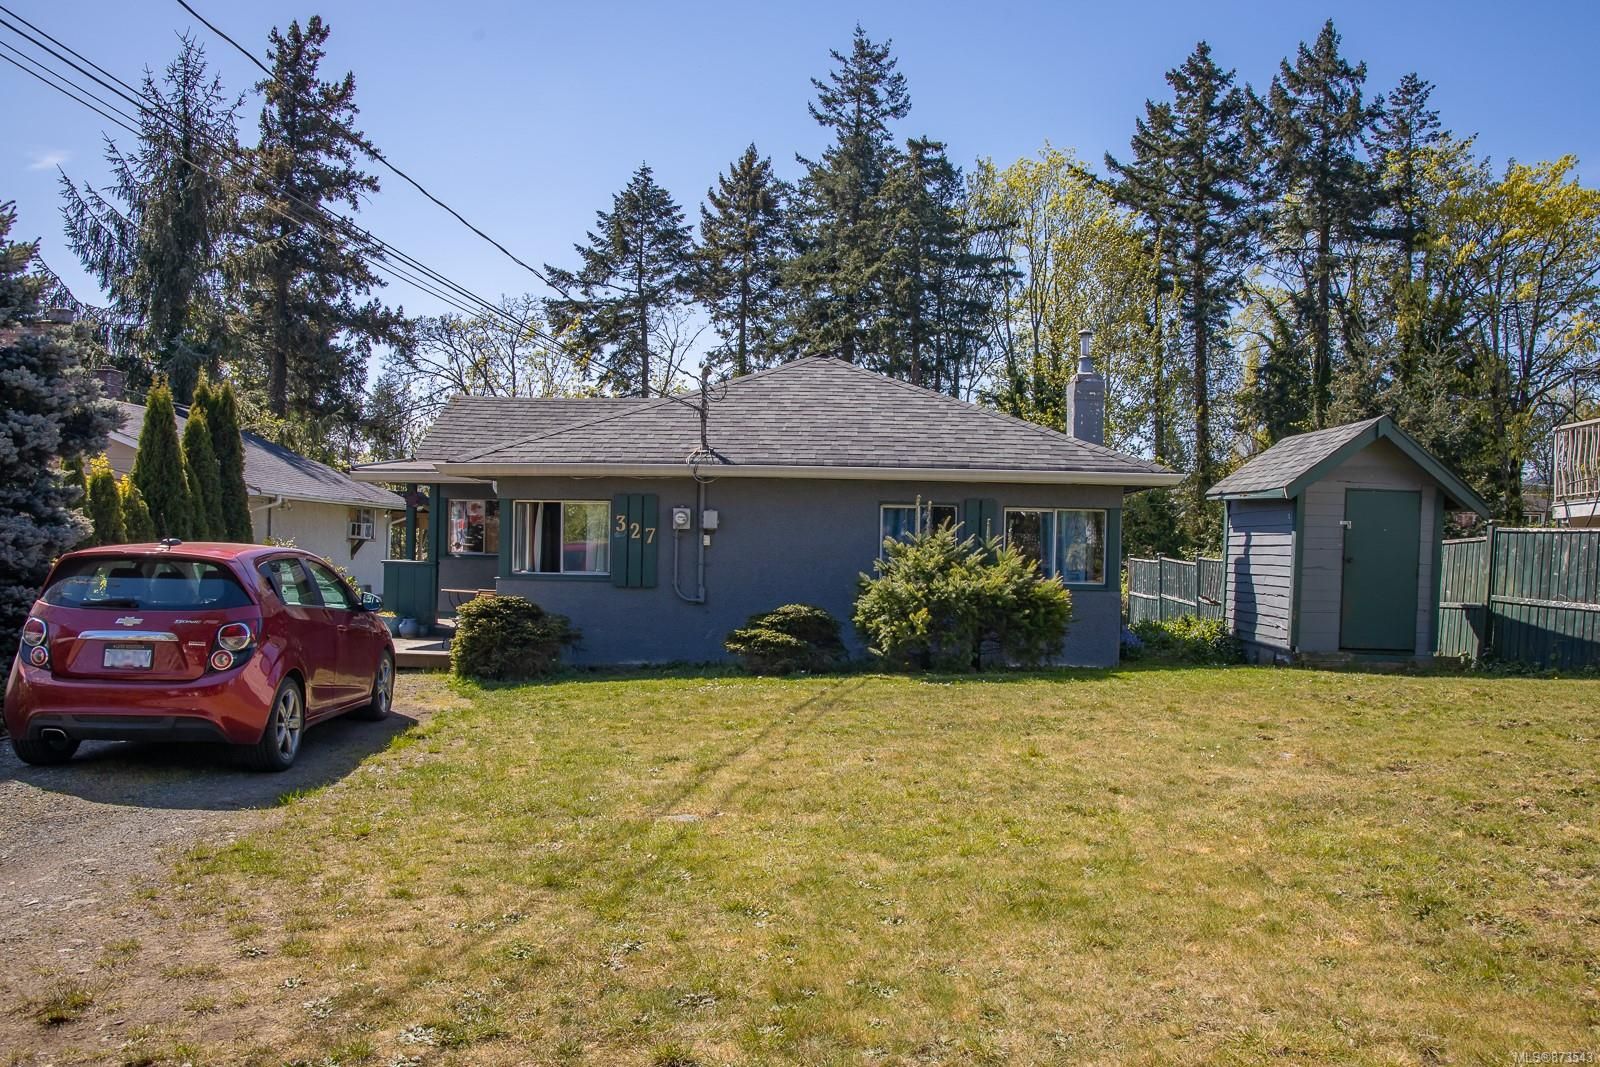 Photo 3: Photos: 327 St. George St in Nanaimo: Na Central Nanaimo House for sale : MLS®# 873543